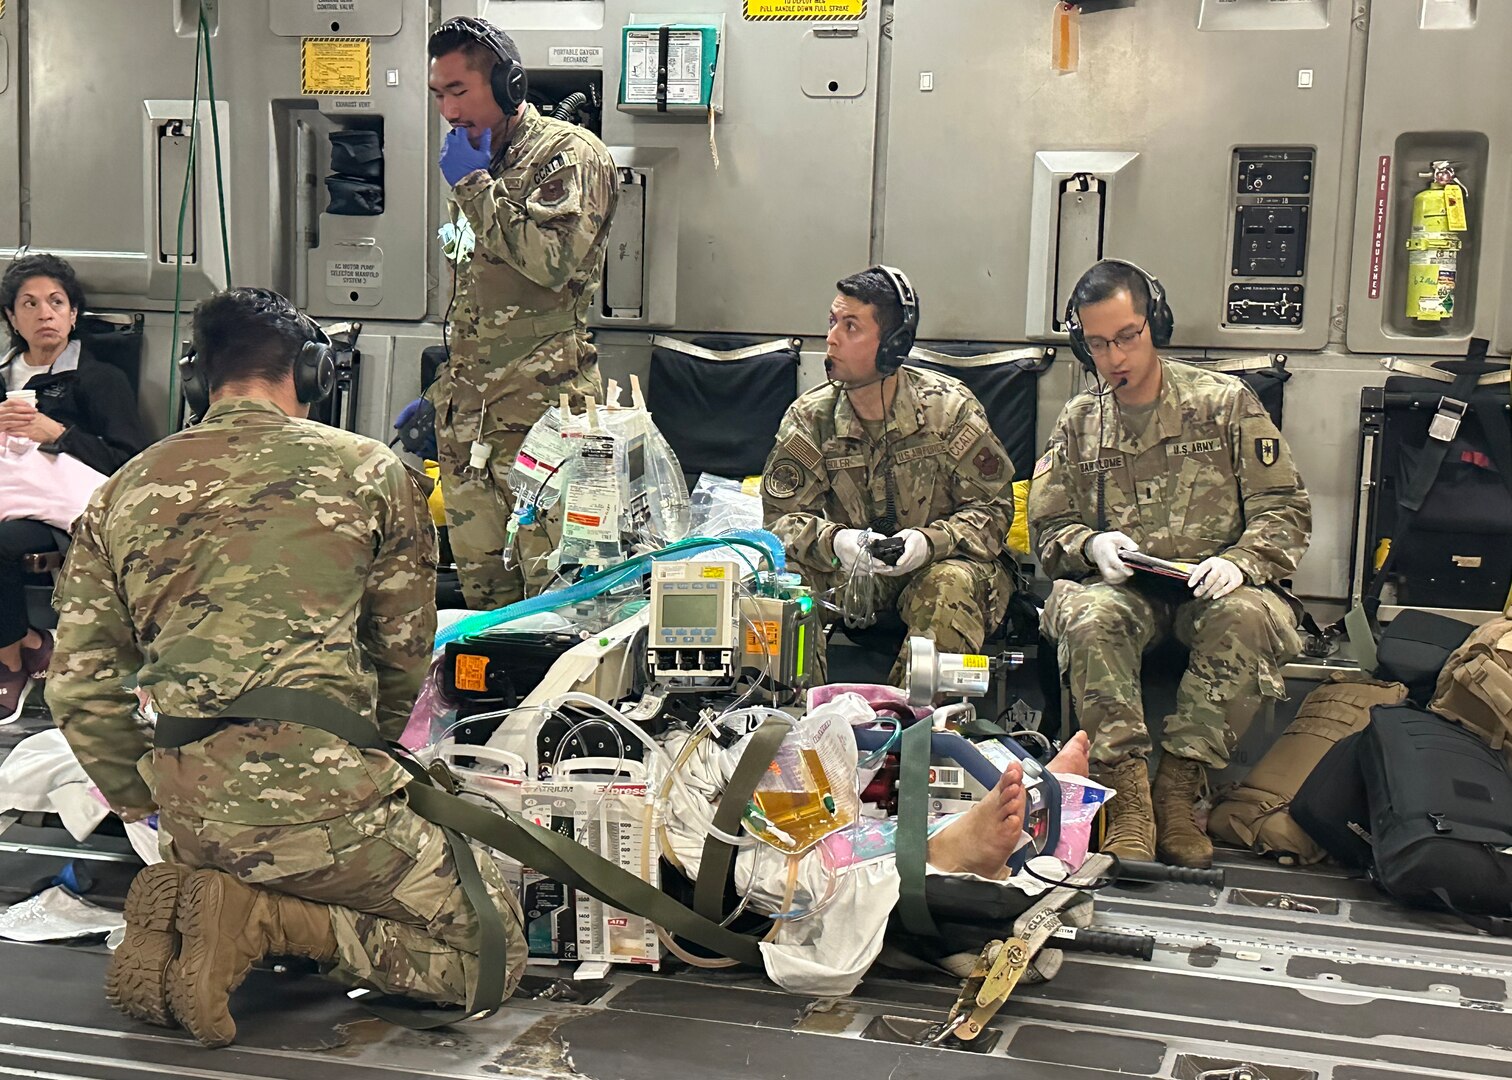 Medics from the 59th Medical Wing’s and Brooke Army Medical Center's Extracorporeal Membrane Oxygenation and Critical Care Air Transport Teams care for one of two patients from the University Medical Center of El Paso, Texas in a C-17 Globemaster III on the way to BAMC, Joint Base San Antonio-Fort Sam Houston, Texas, Oct. 24, 2023. This is the first air transport of dual-patients on ECMO simultaneously in the Department of Defense’s history. (Courtesy photo by the medical team)